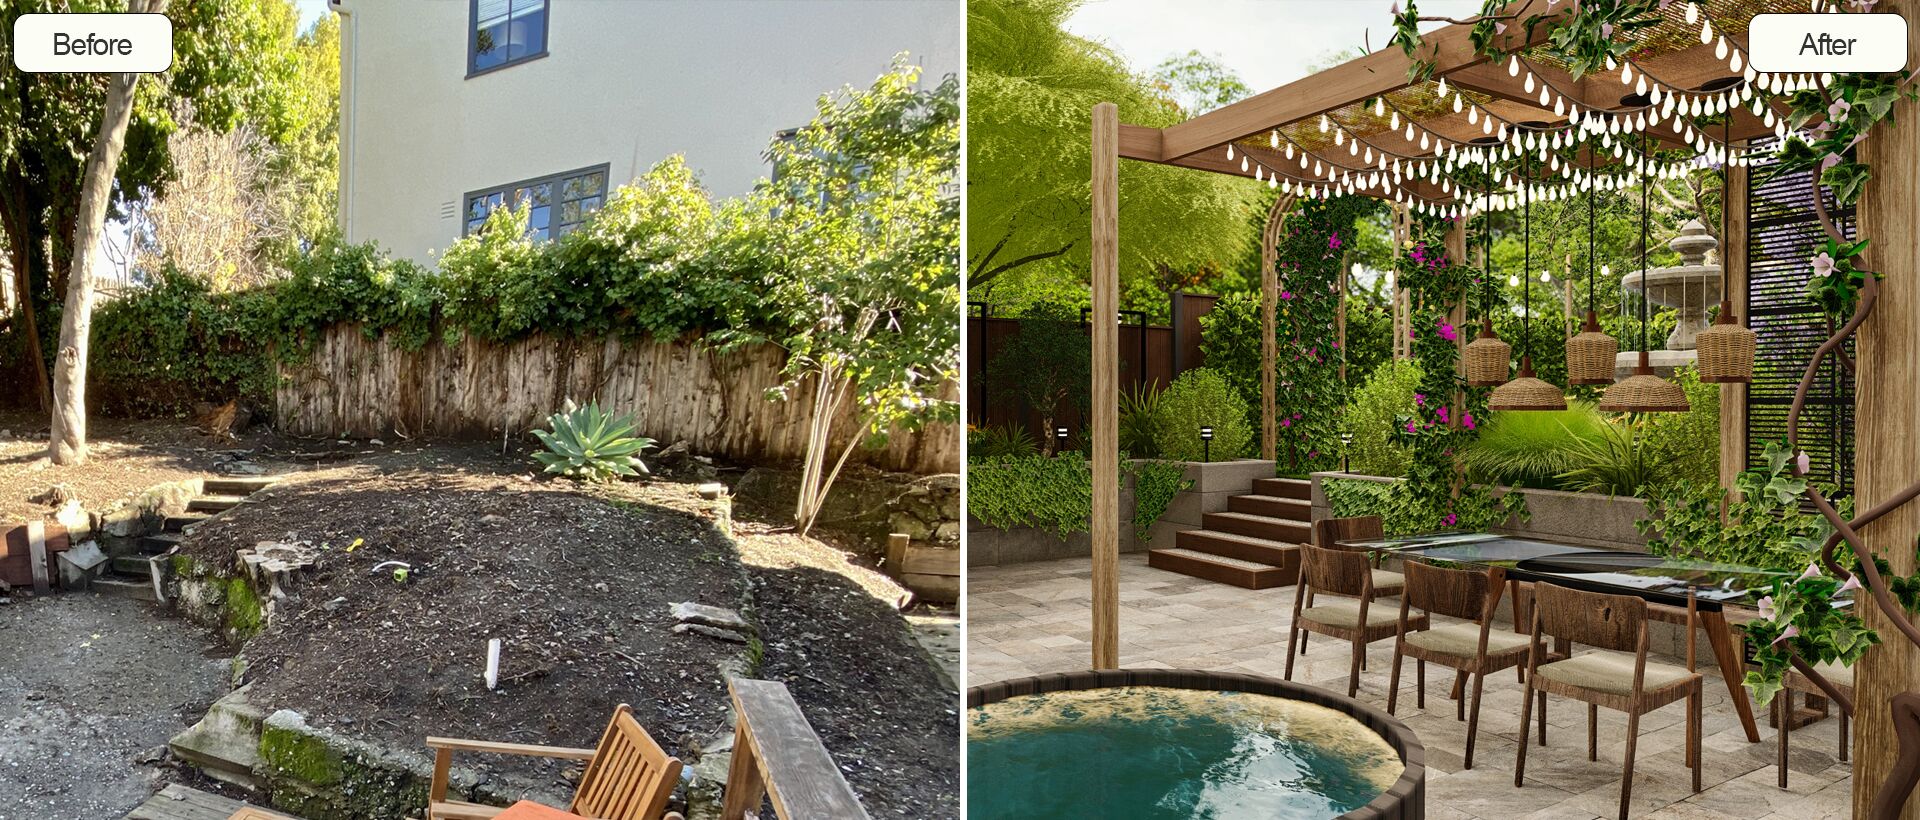 Before and after views of a backyard renovation, from barren to lush with a new pergola, hanging lights, dining area, and vibrant plants